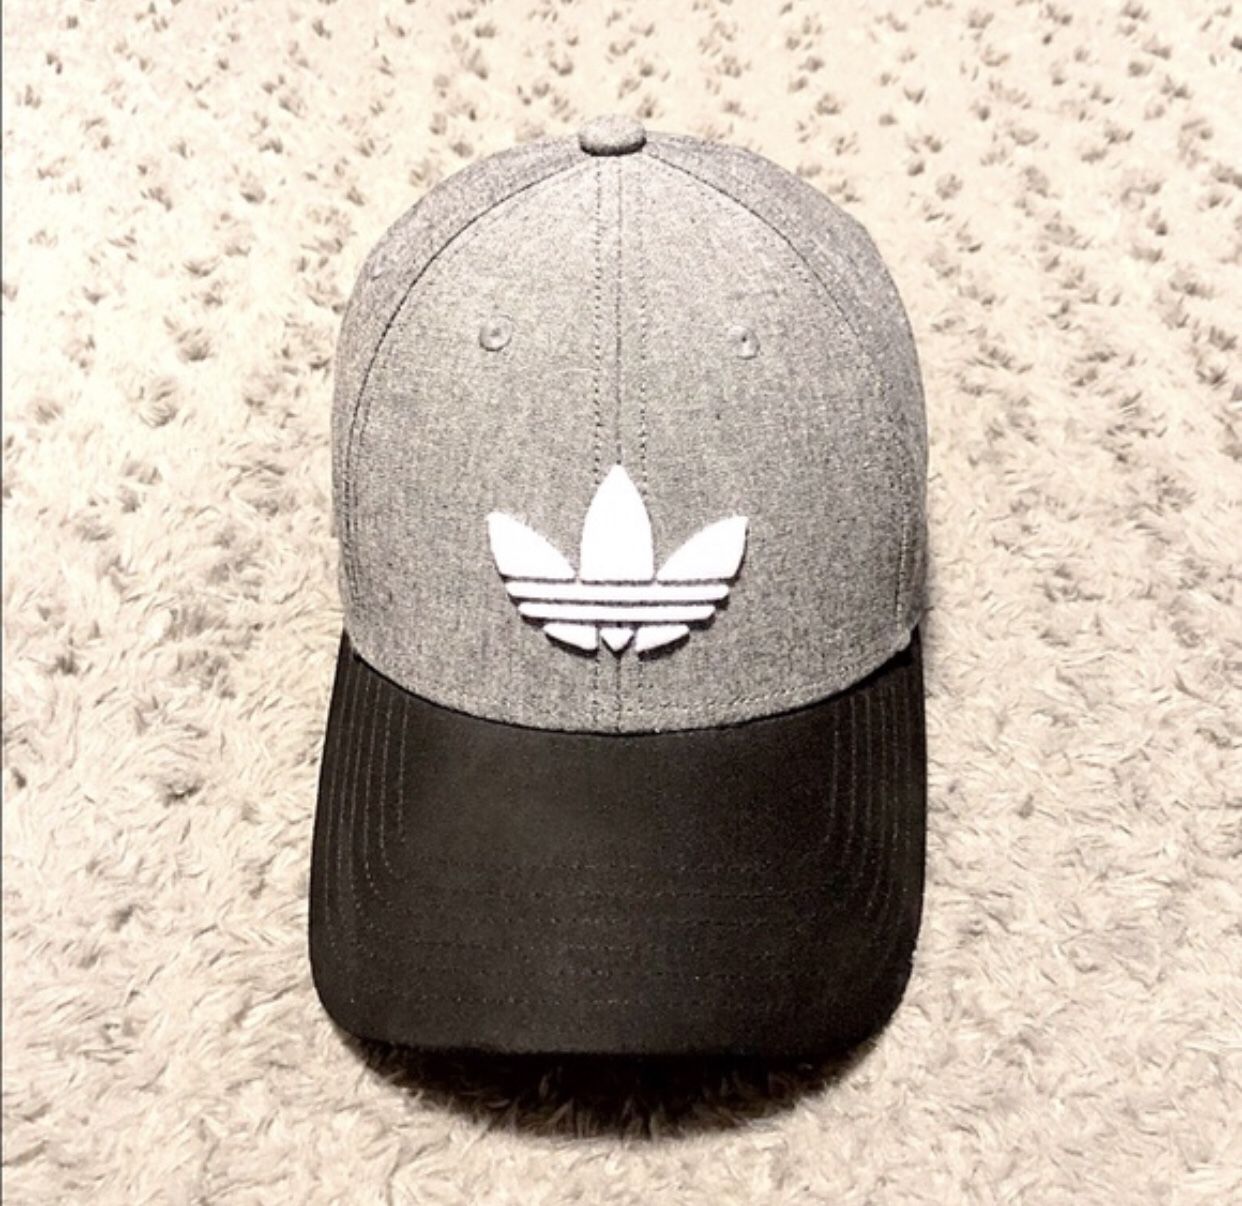 New! Men’s Adidas SnapBack cap paid $28 one size Brand new never worn Grey and black.